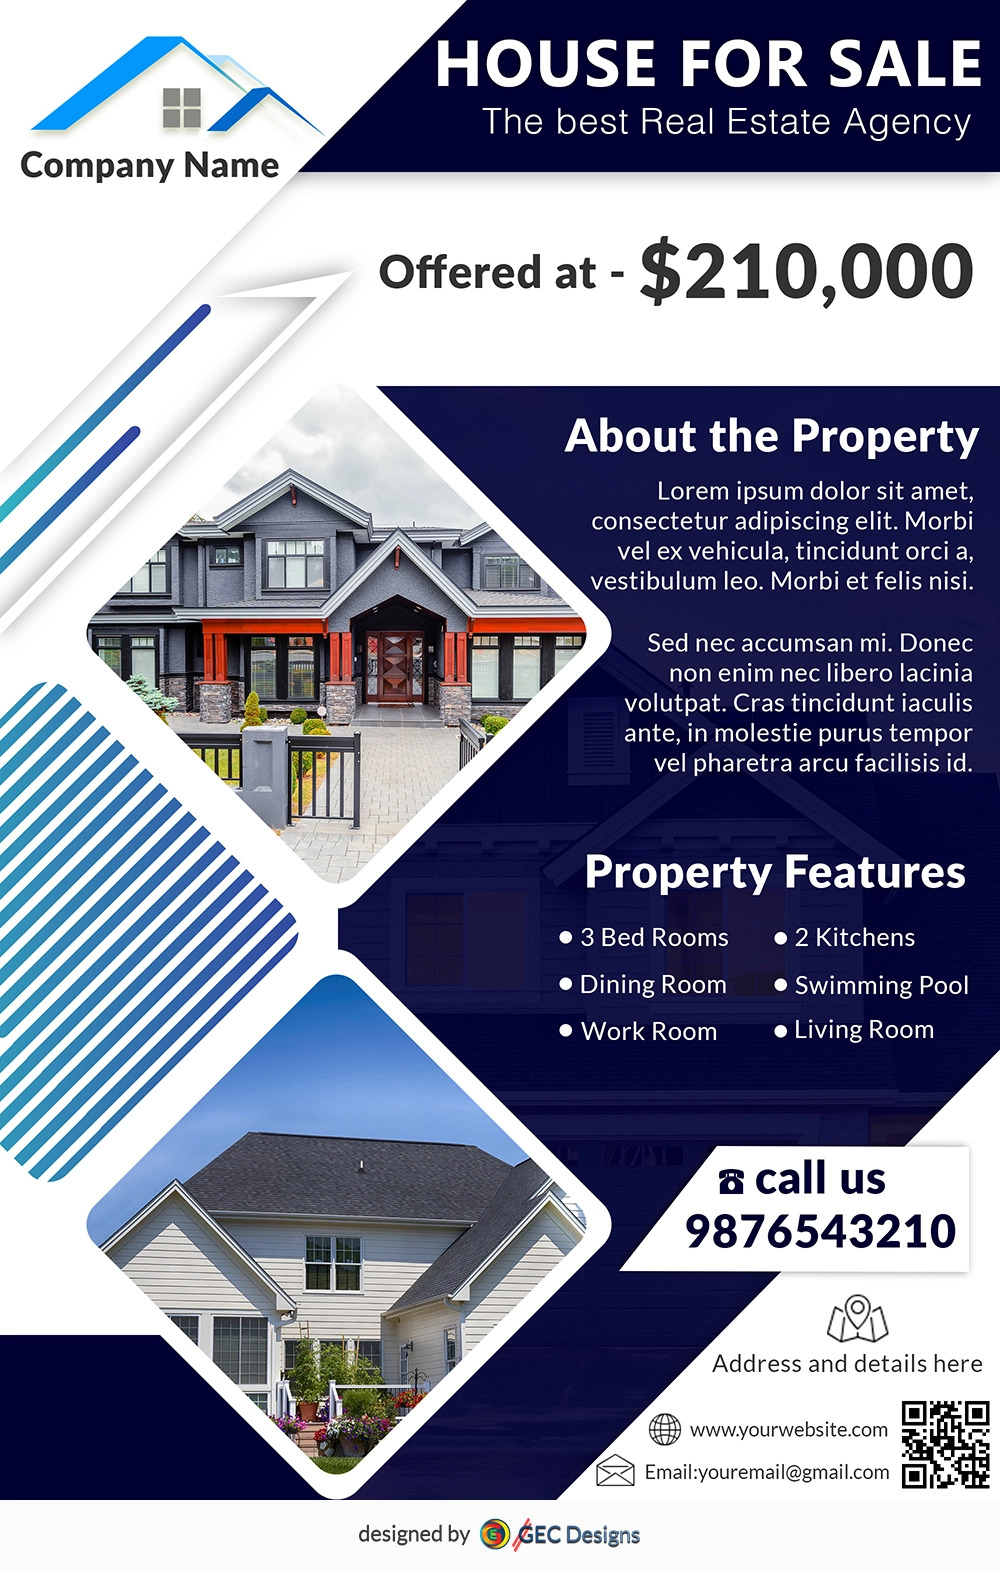 Download Free Property For Sale Real Estate Flyer Design With Regard To Home For Sale Flyer Template